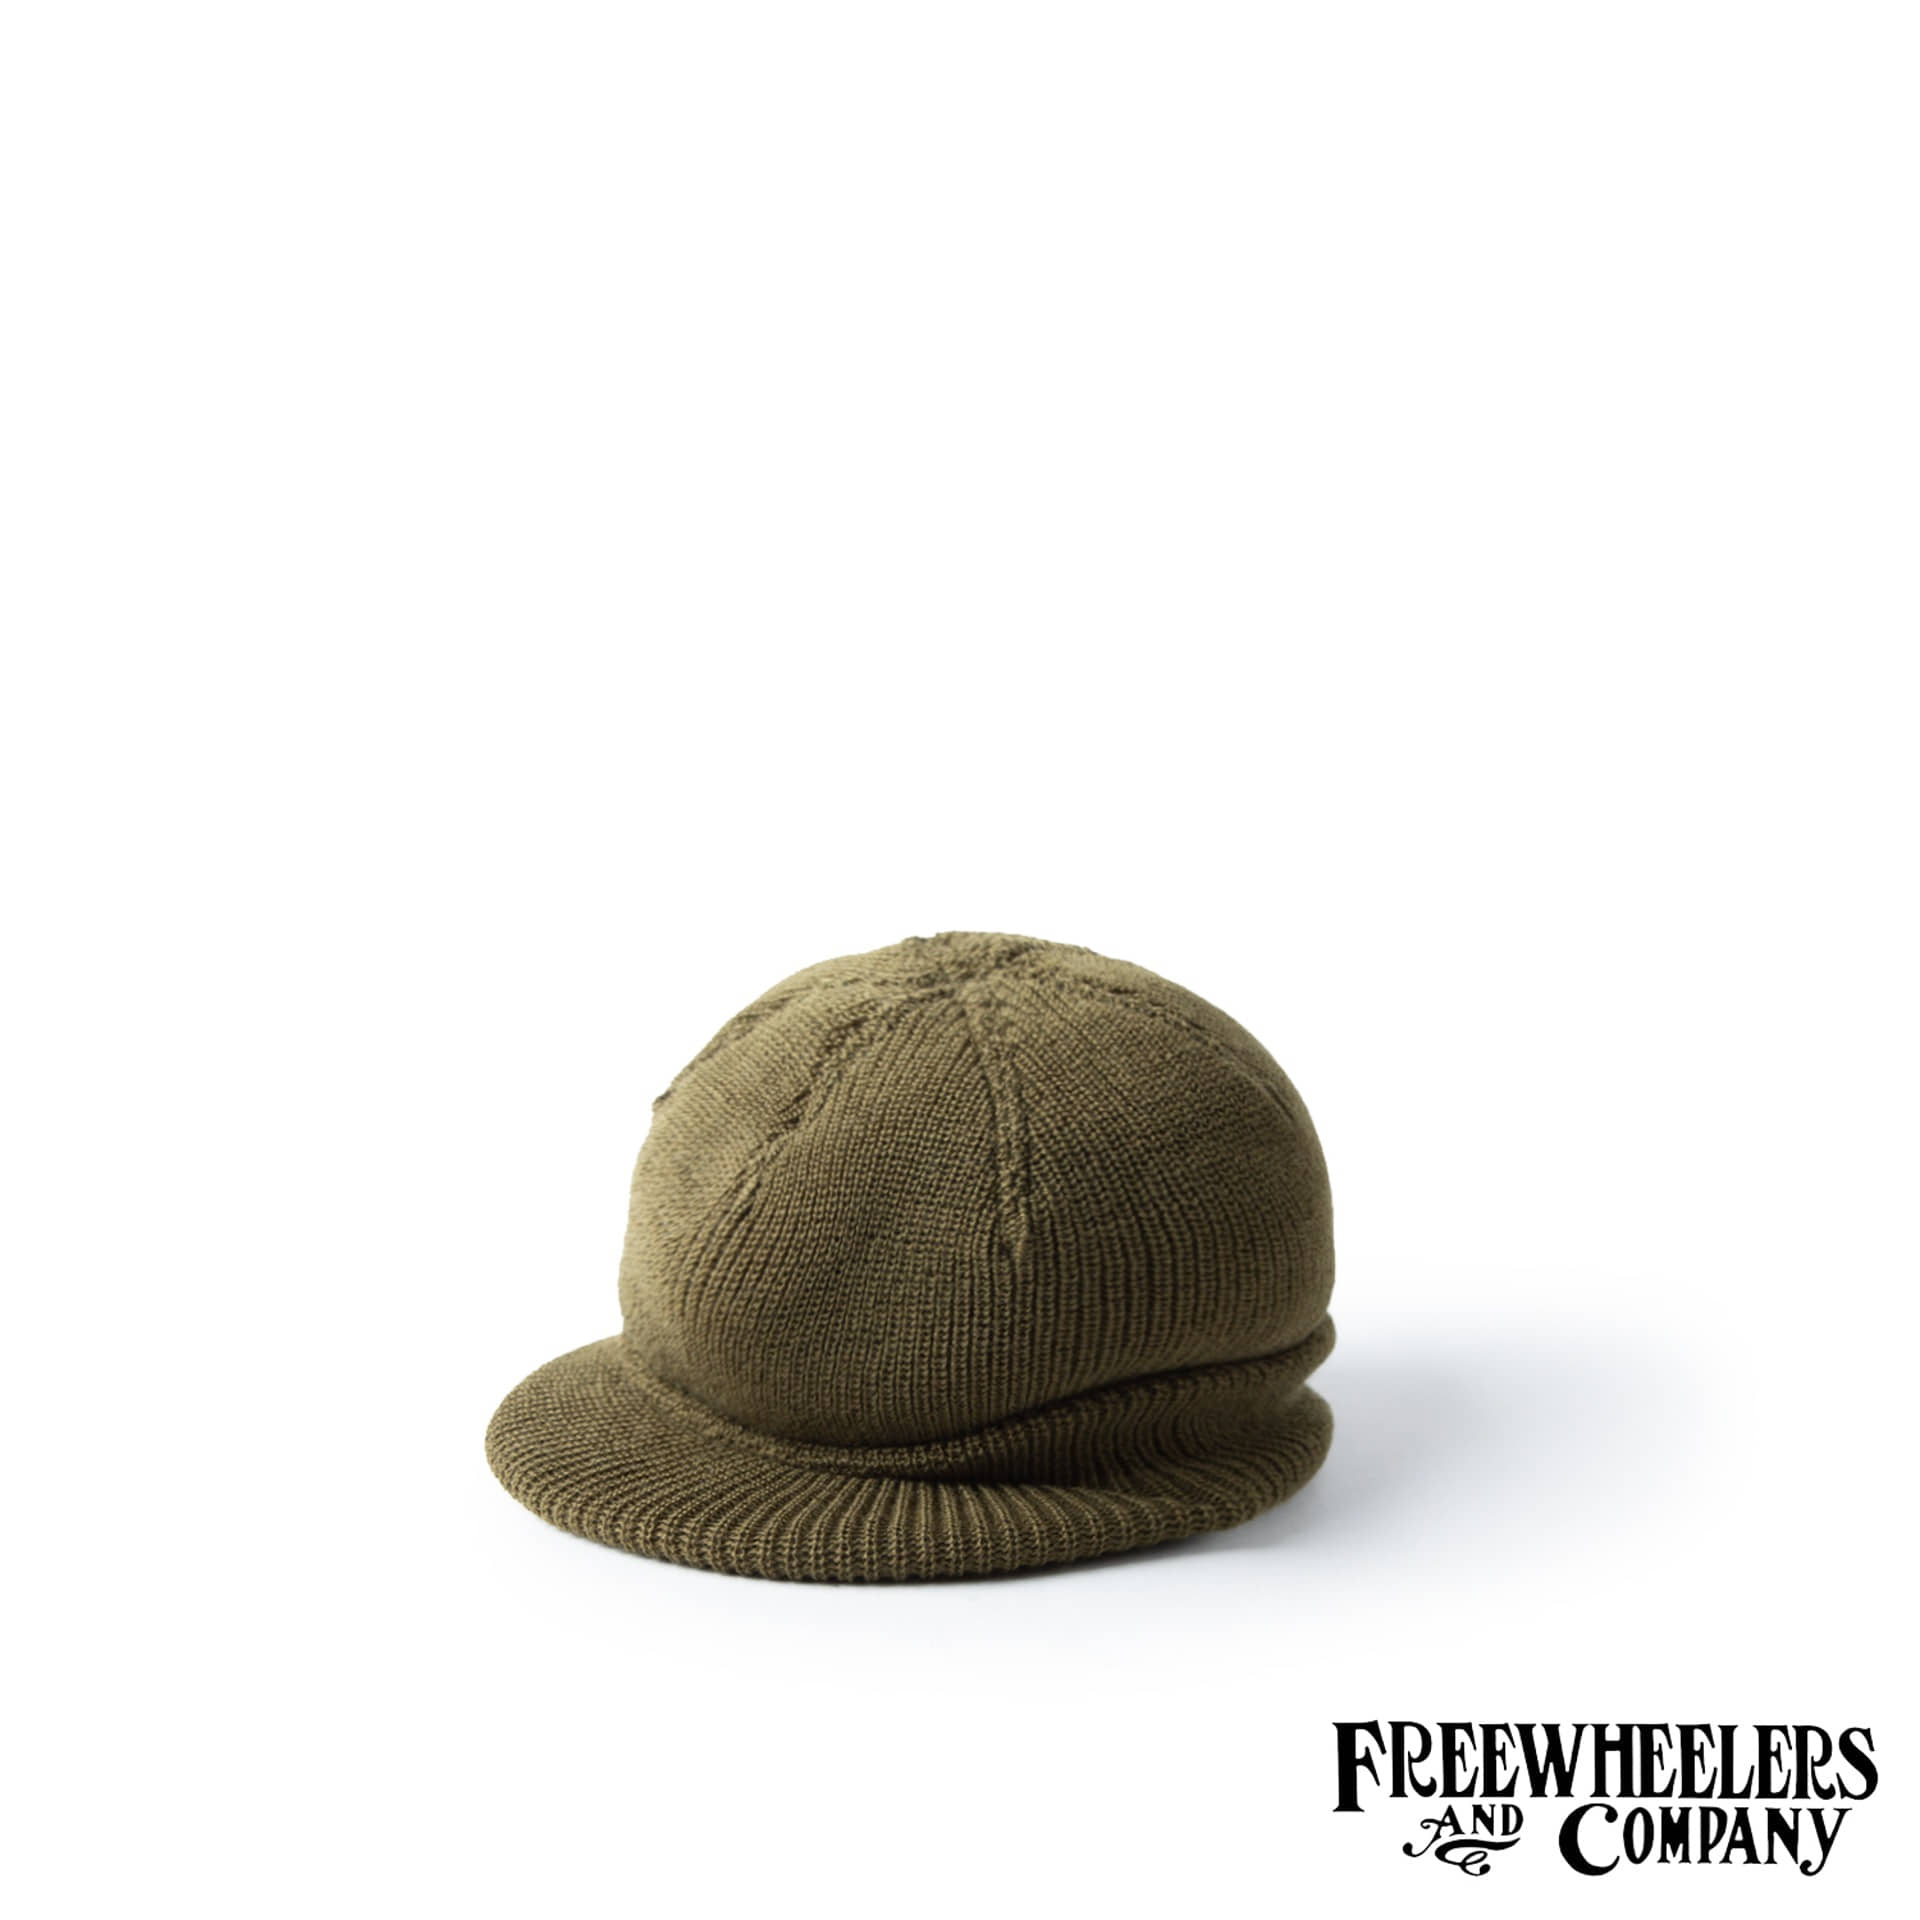 [The Union Special Overalls] 1940~1950s CIVILIAN MILITARY STYLE CLOTHING“M-1941” WOOL KNIT JEEP CAP(Olive)